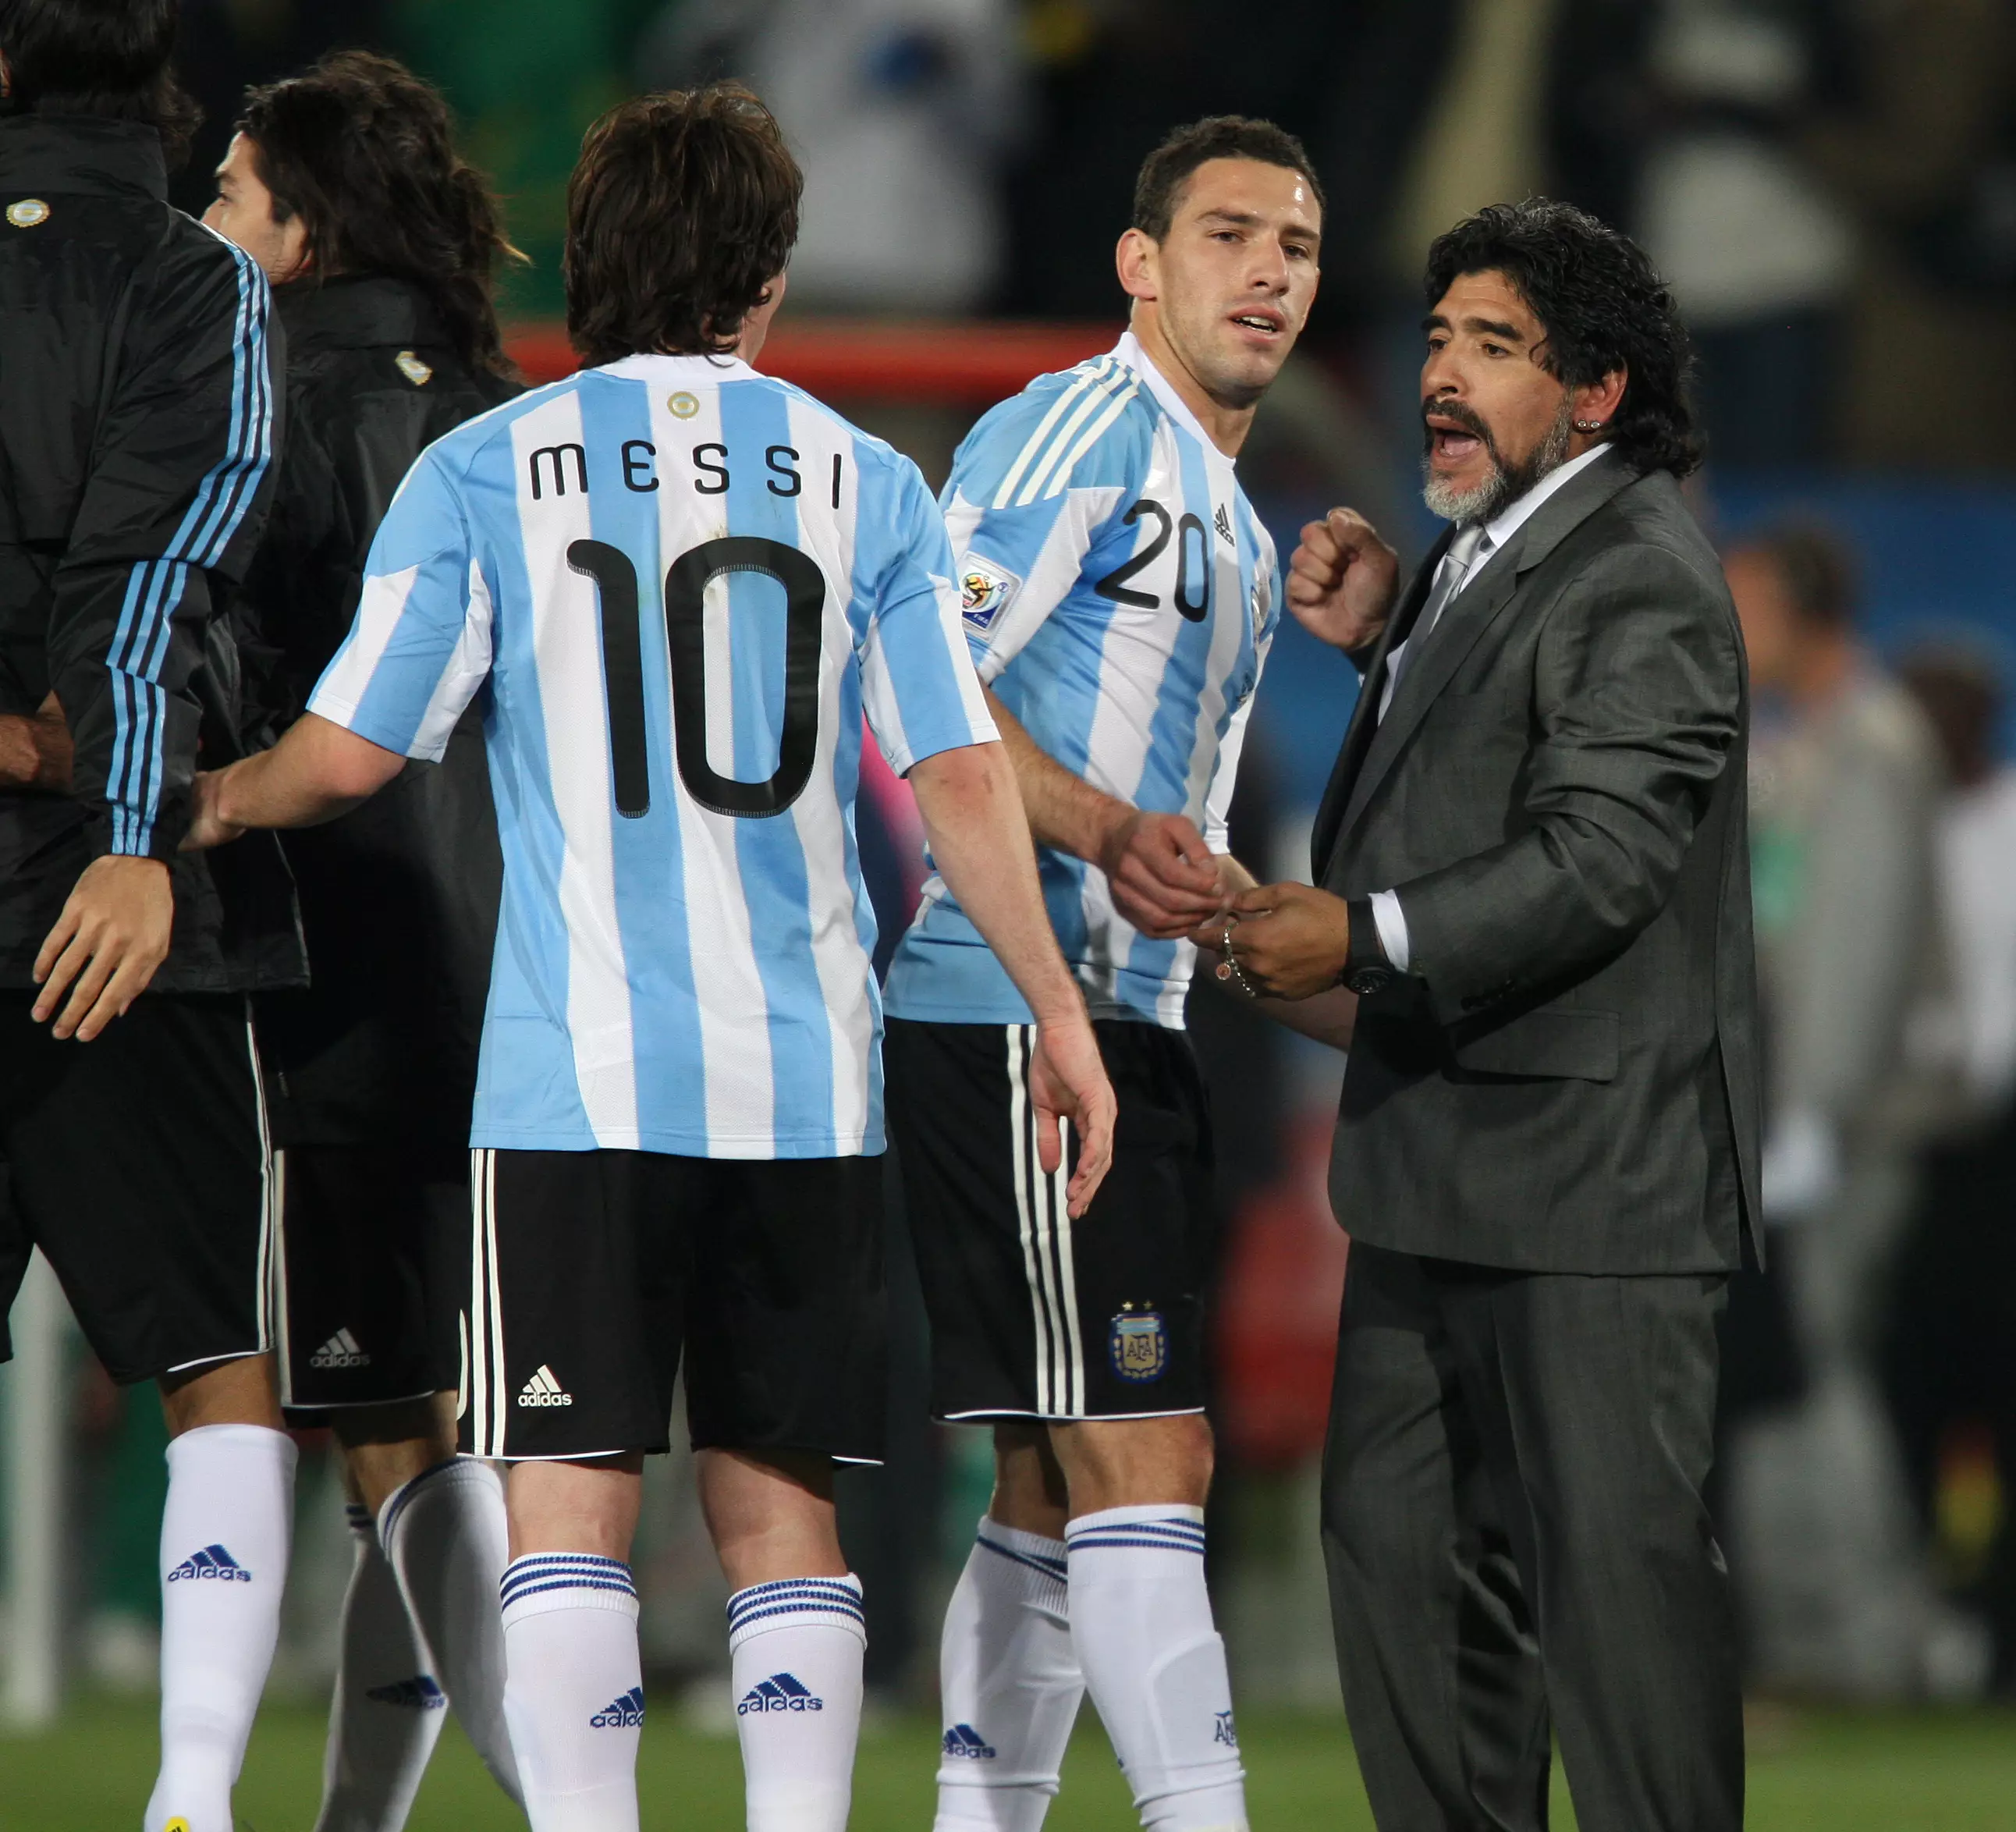 Maradona managed Messi at the 2010 World Cup. Image: PA Images